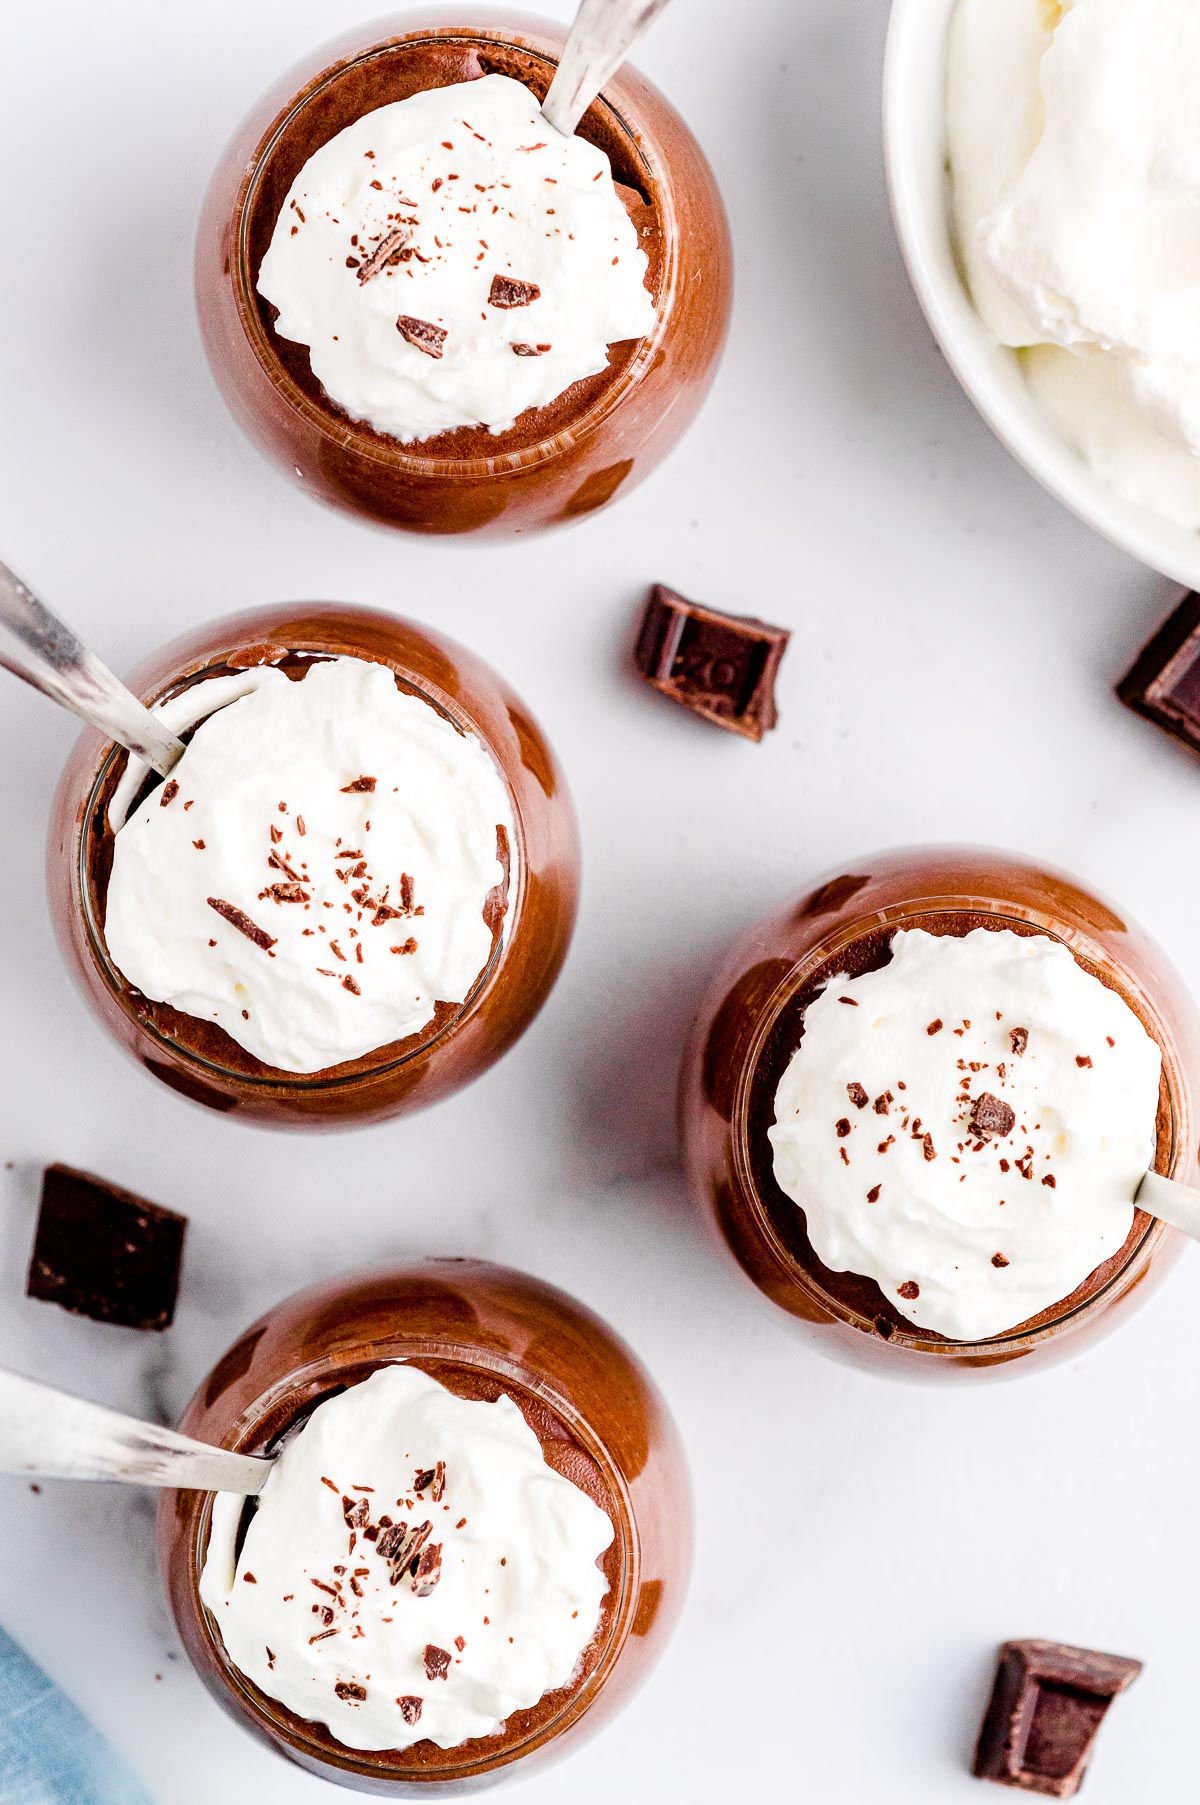 four glasses with chocolate mousse in them topped with whipped cream and chocolate shavings ready to be eaten.